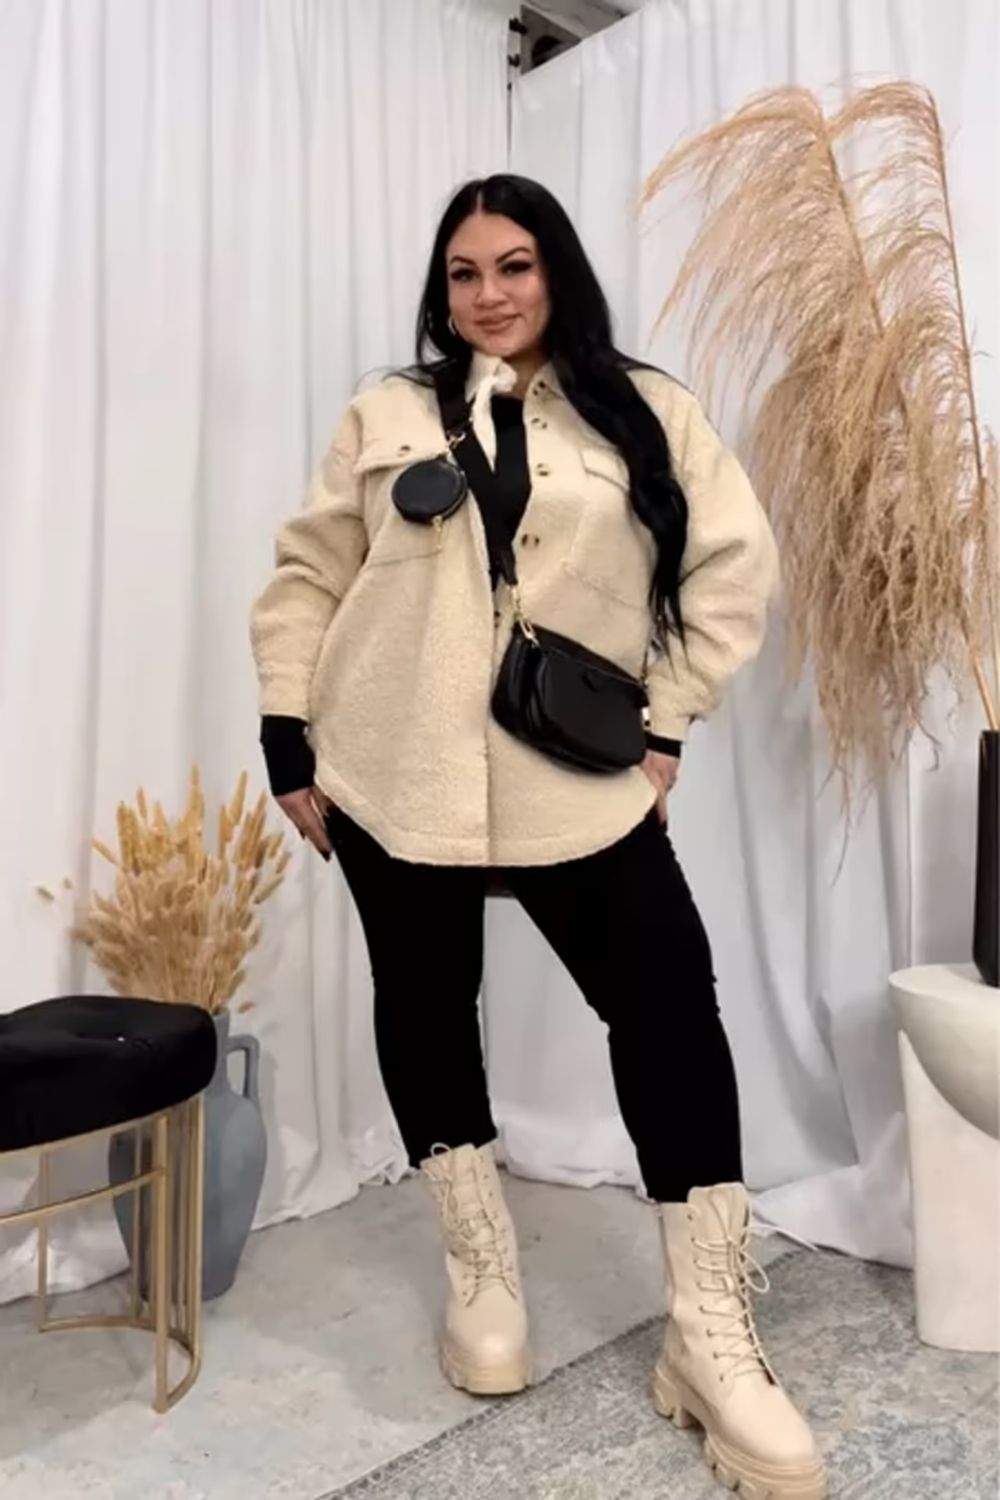 The cream sherpa jacket and black pants in this ensemble create a stylish contrast, adding both casual and fashionable elements, while coordinated cream boots and a crossbody bag enhance both function and a cohesive aesthetic.